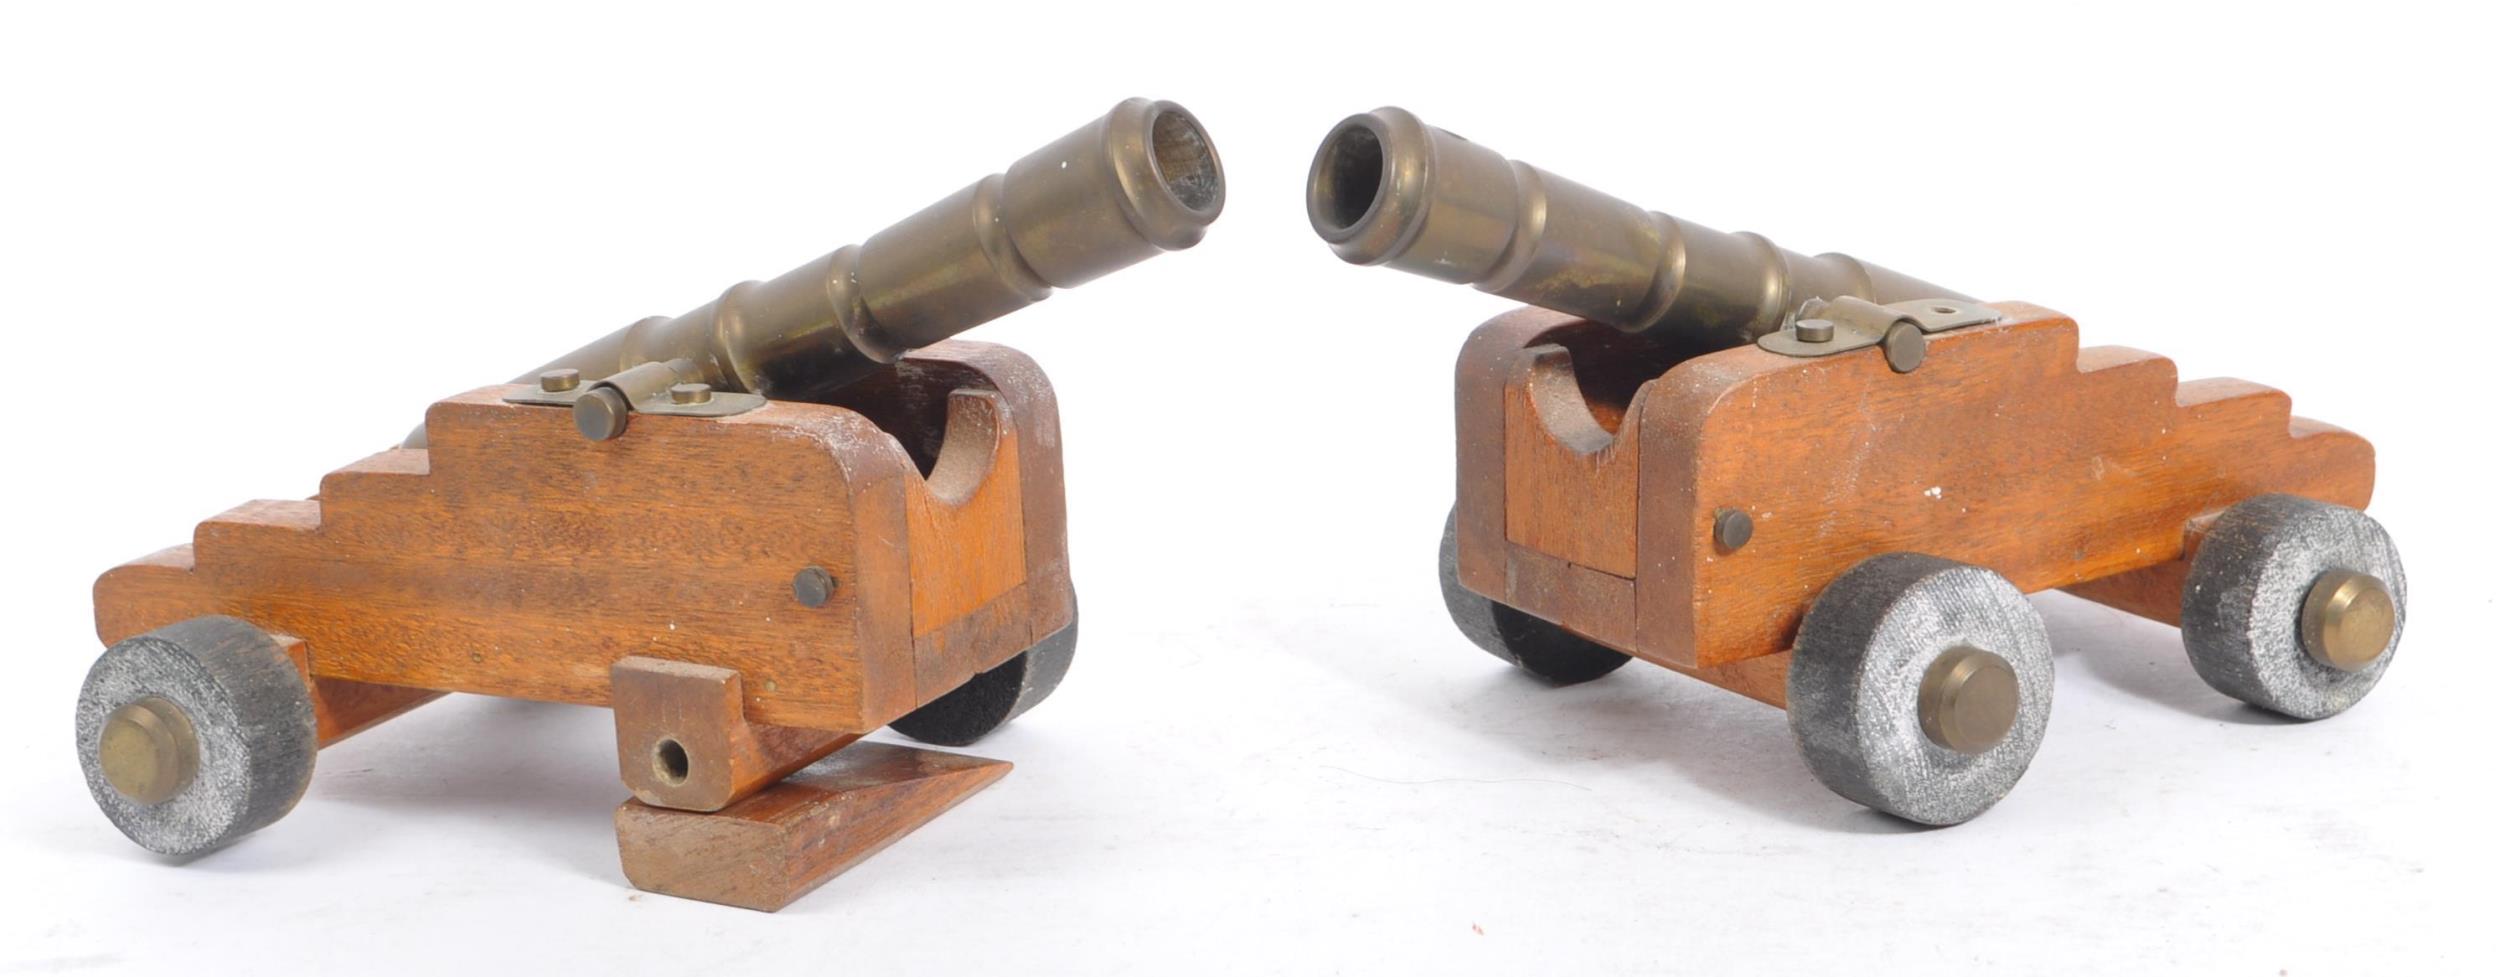 PAIR OF EARLY 20TH CENTURY WOODEN & BRASS DESK CANNONS